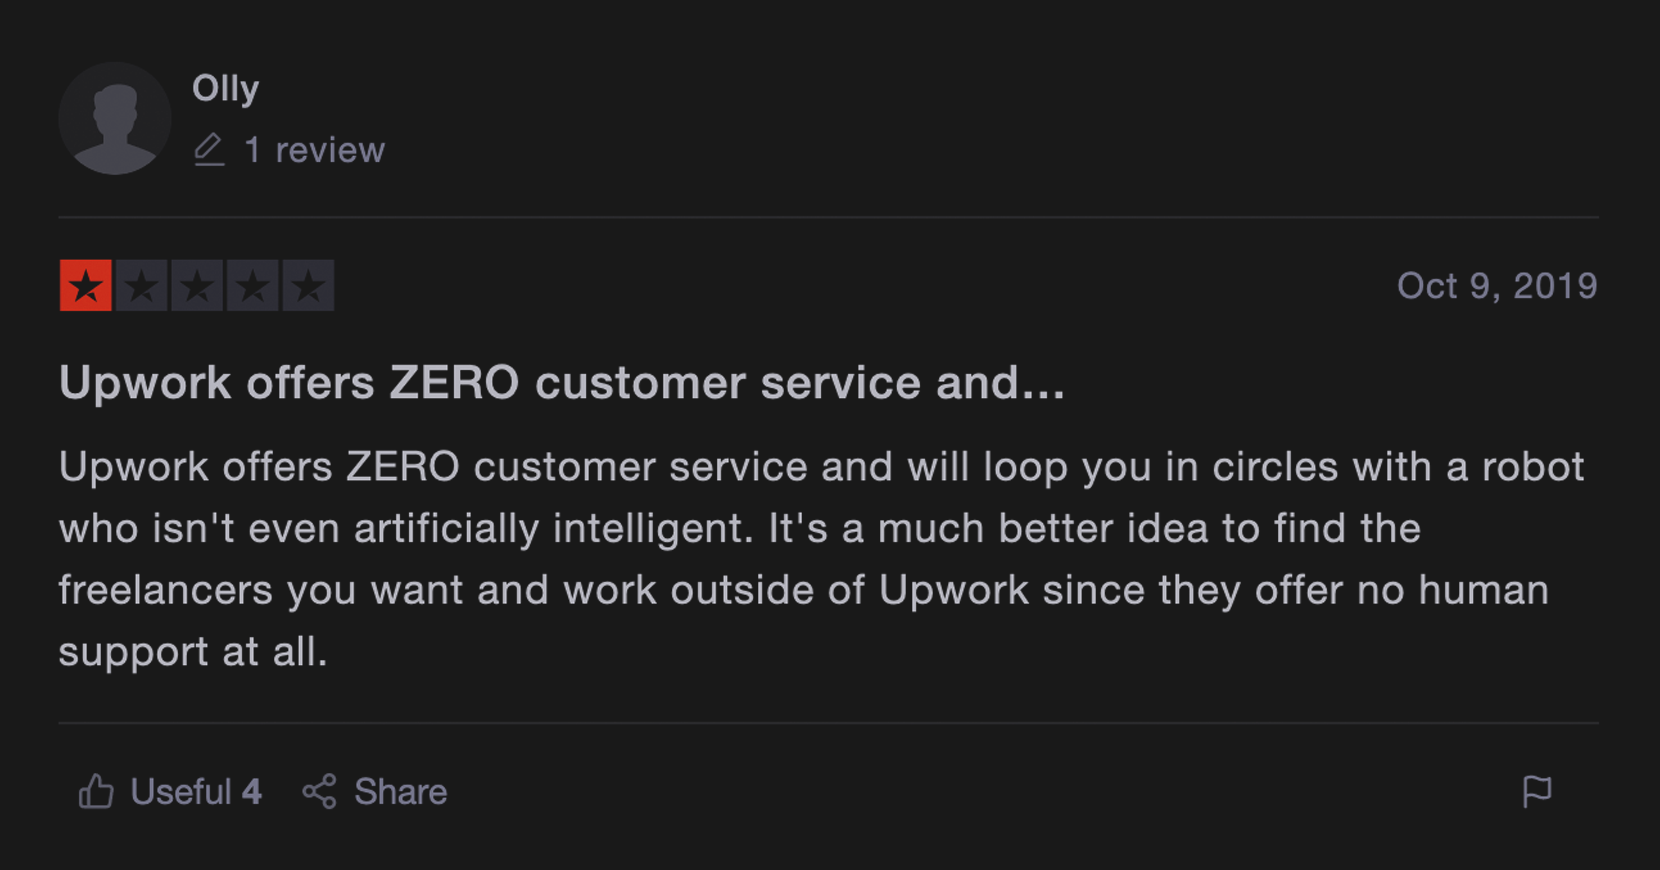 A client's review with 1 star